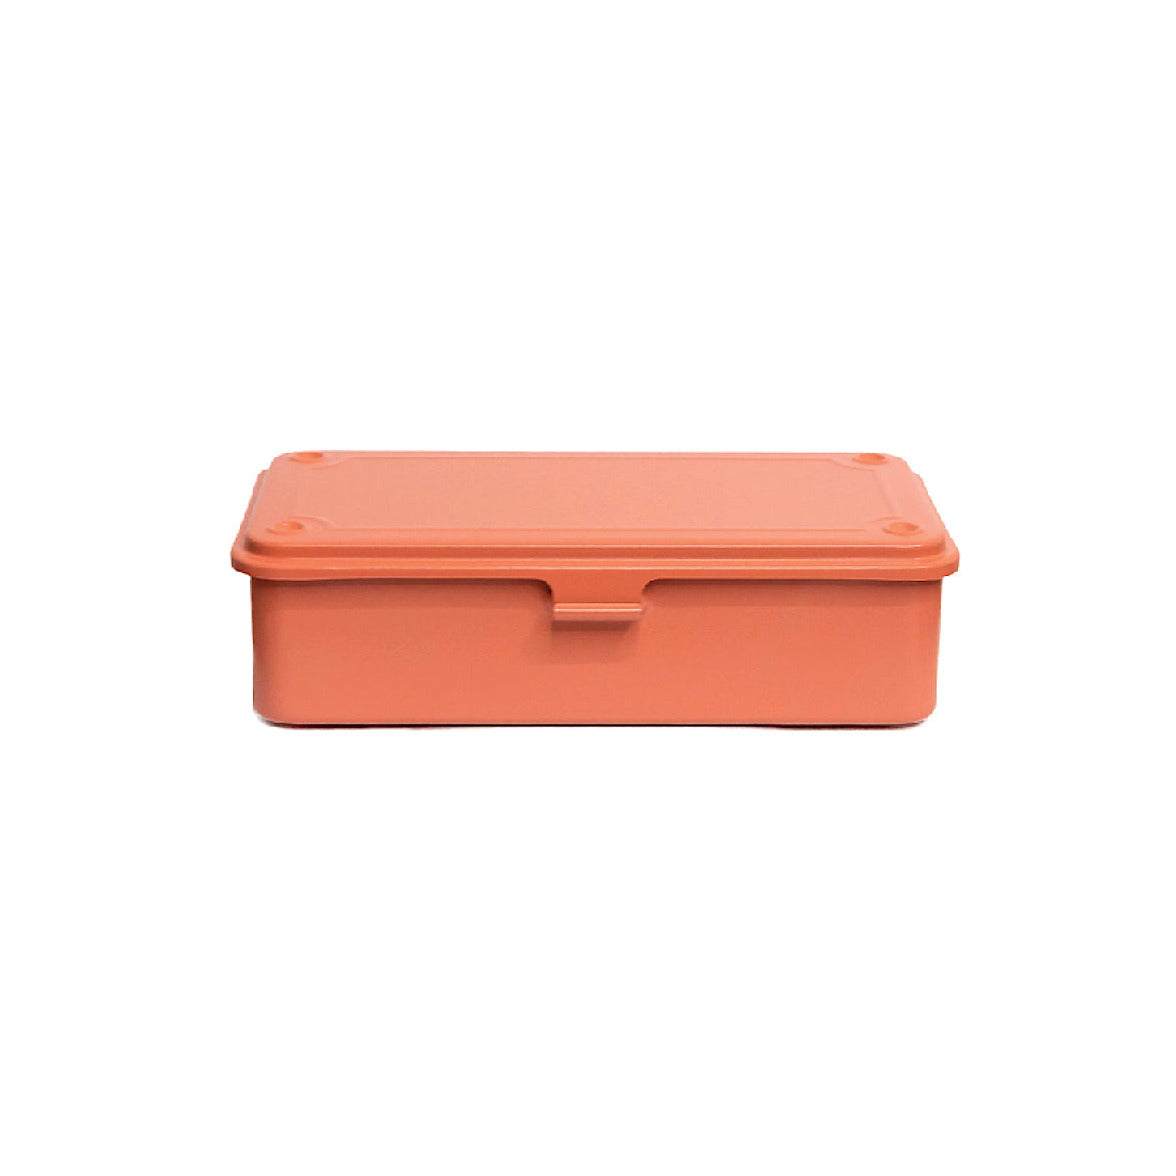 Toolbox Toyo T-190 coral | TOYO STEEL | Made in Japan